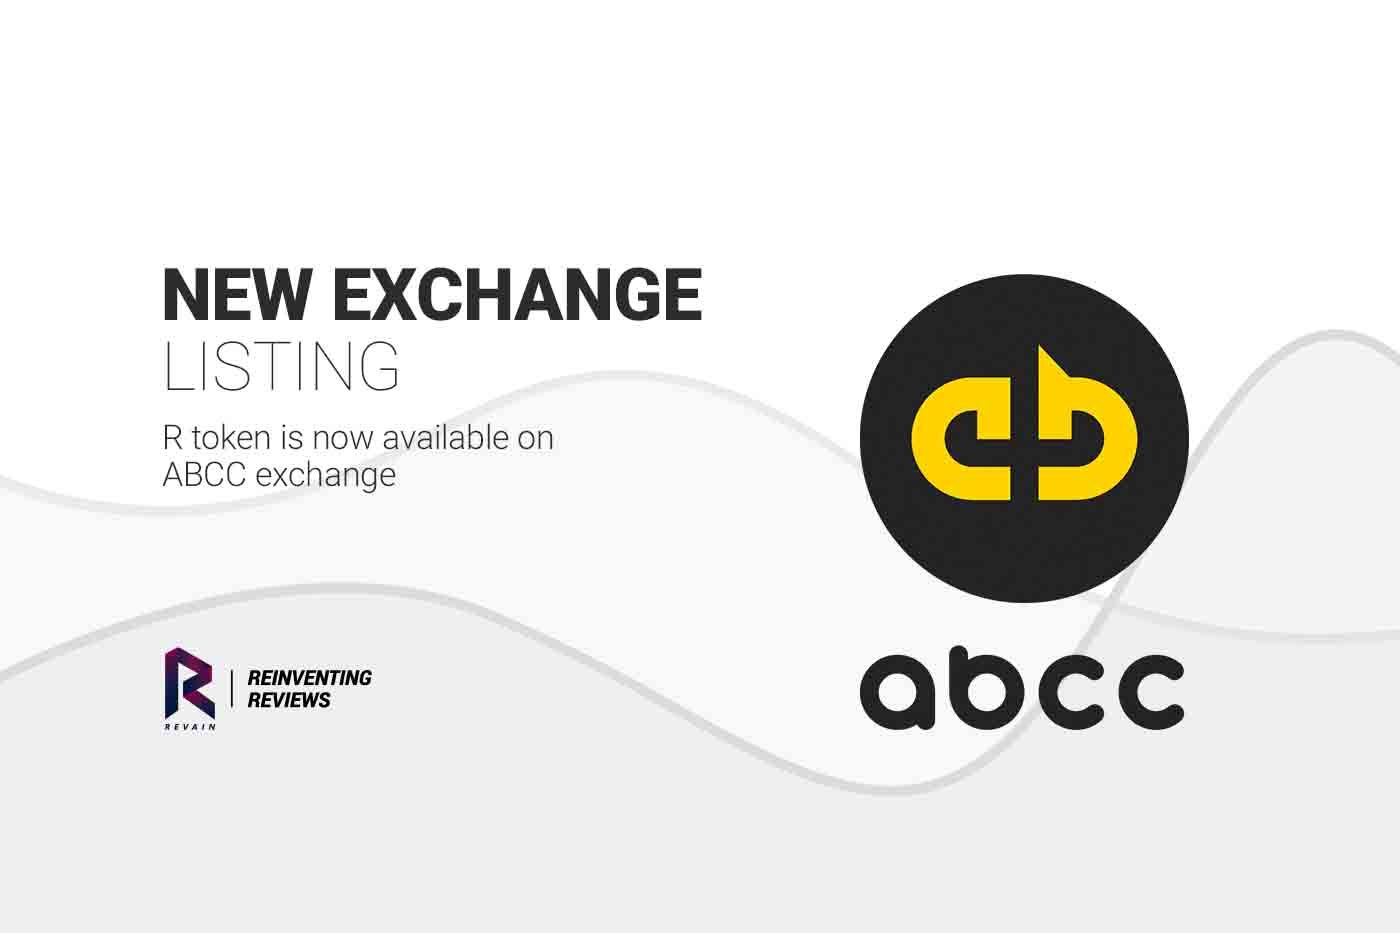 Revain has been listed on the ABCC exchange